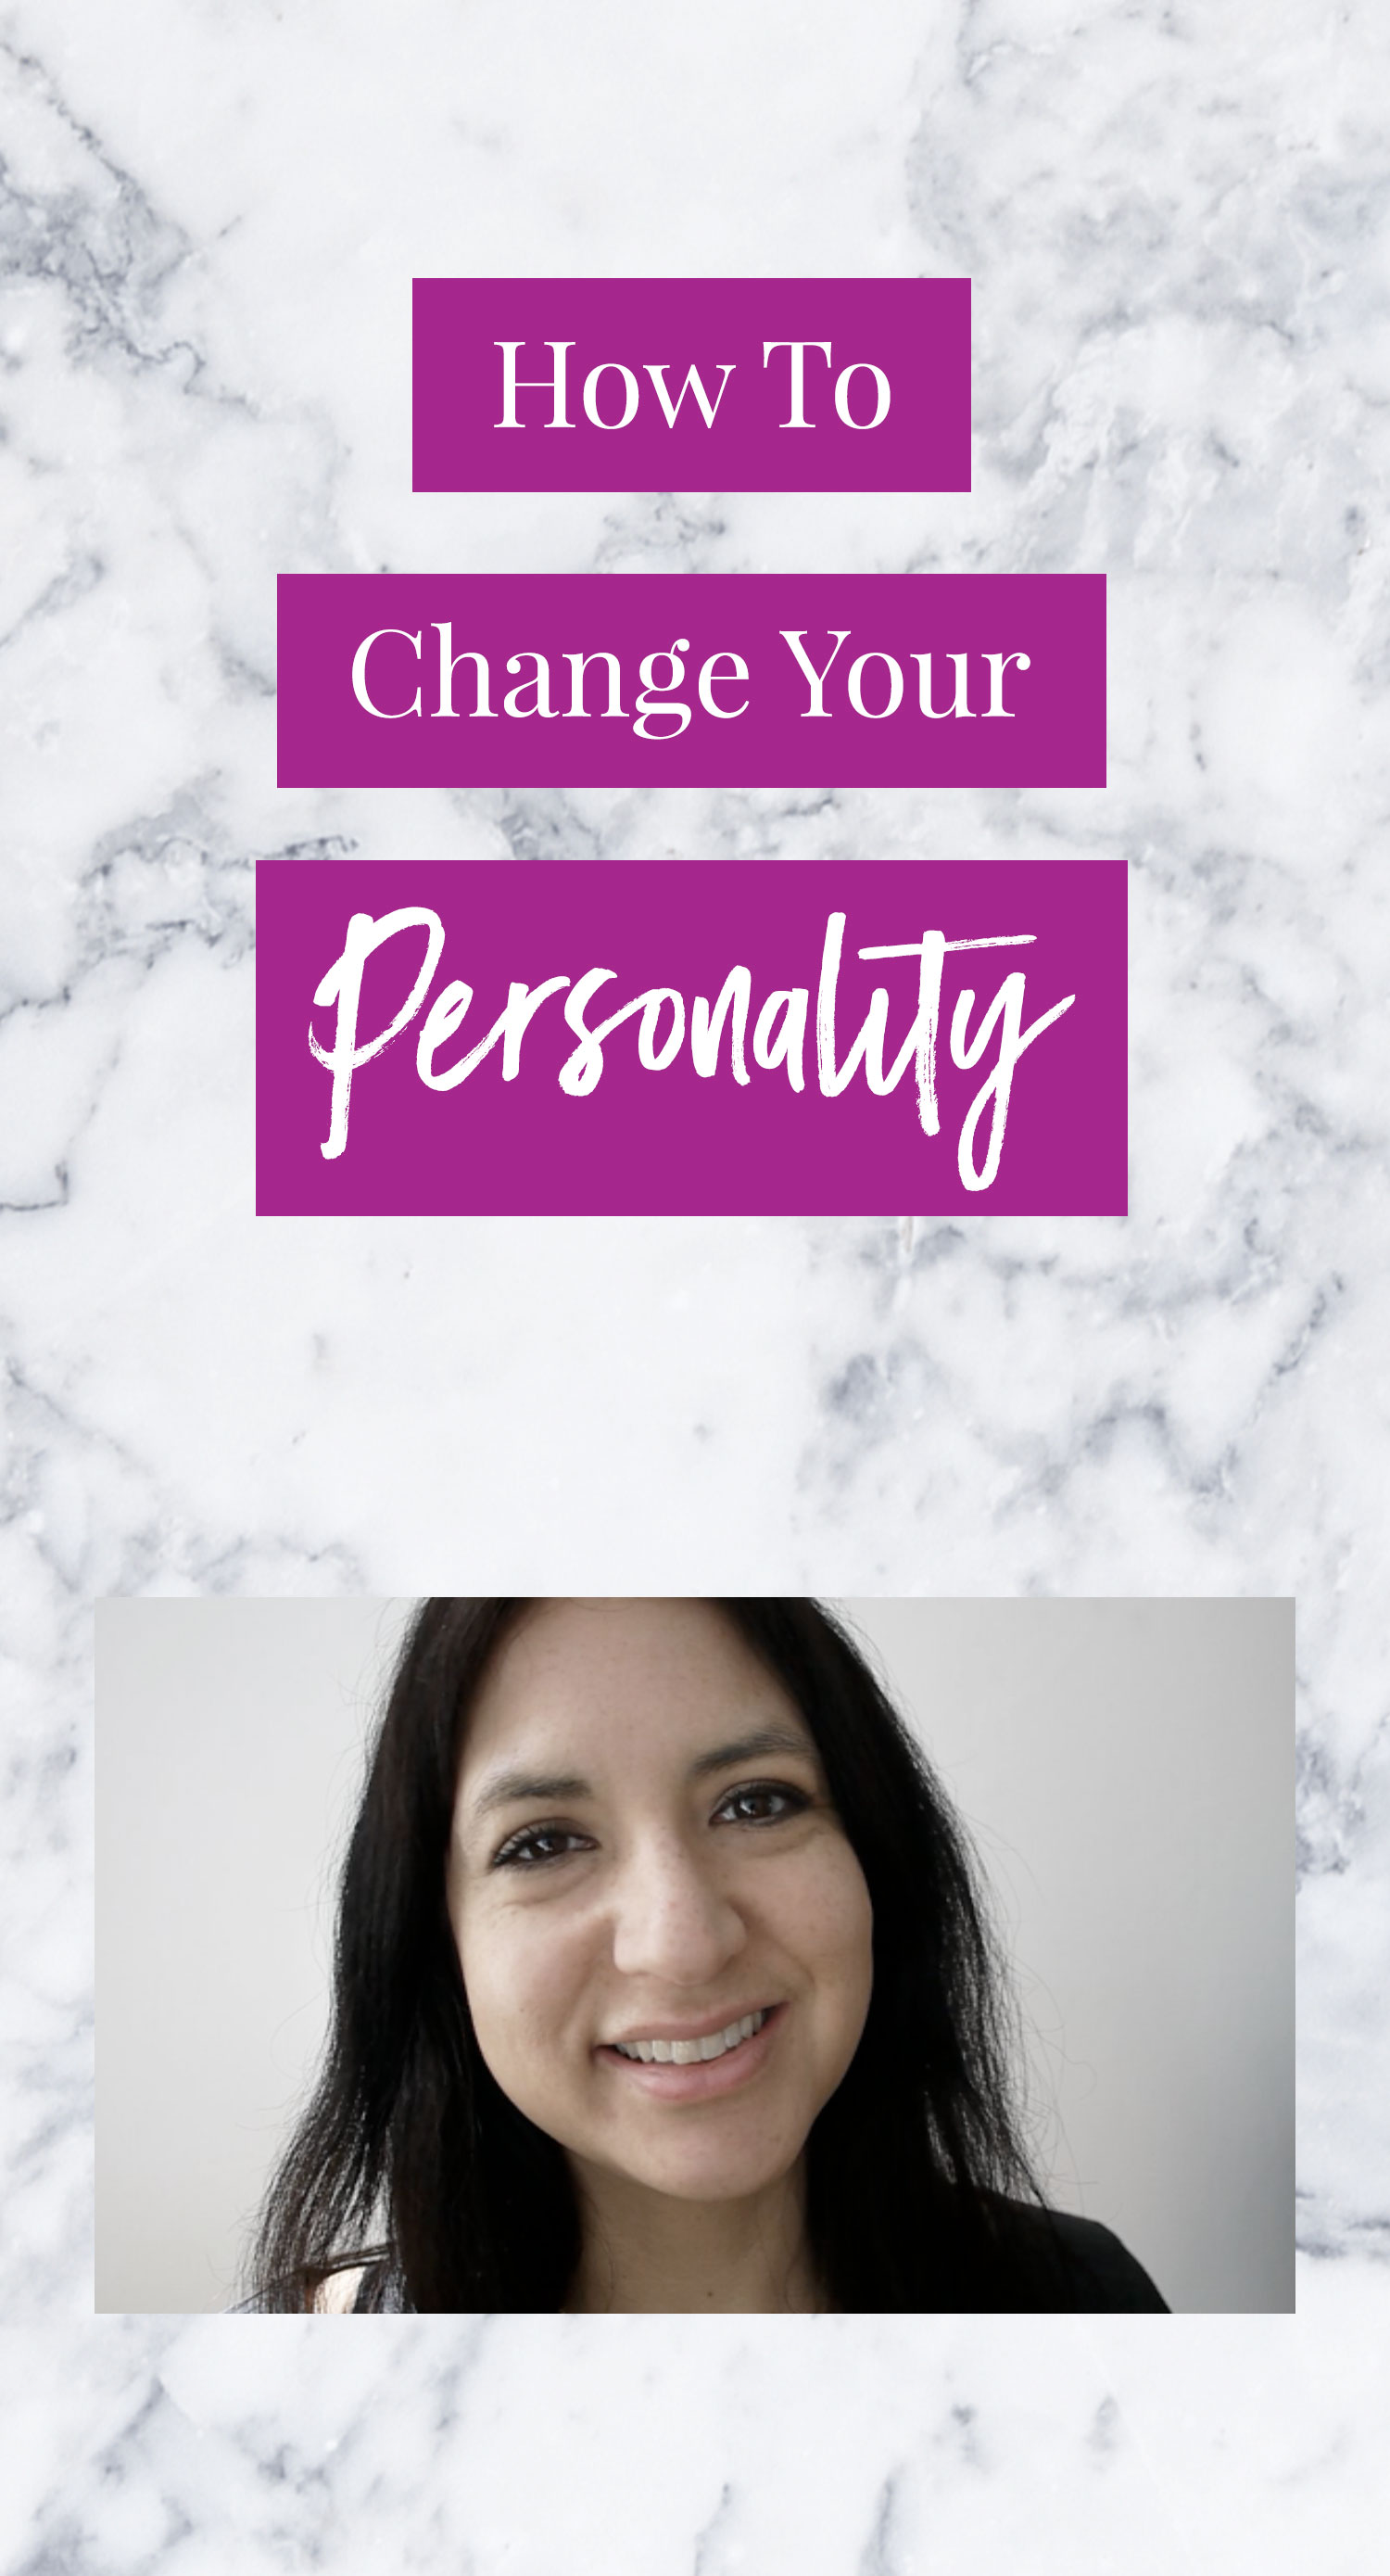 How To Change Your Personality